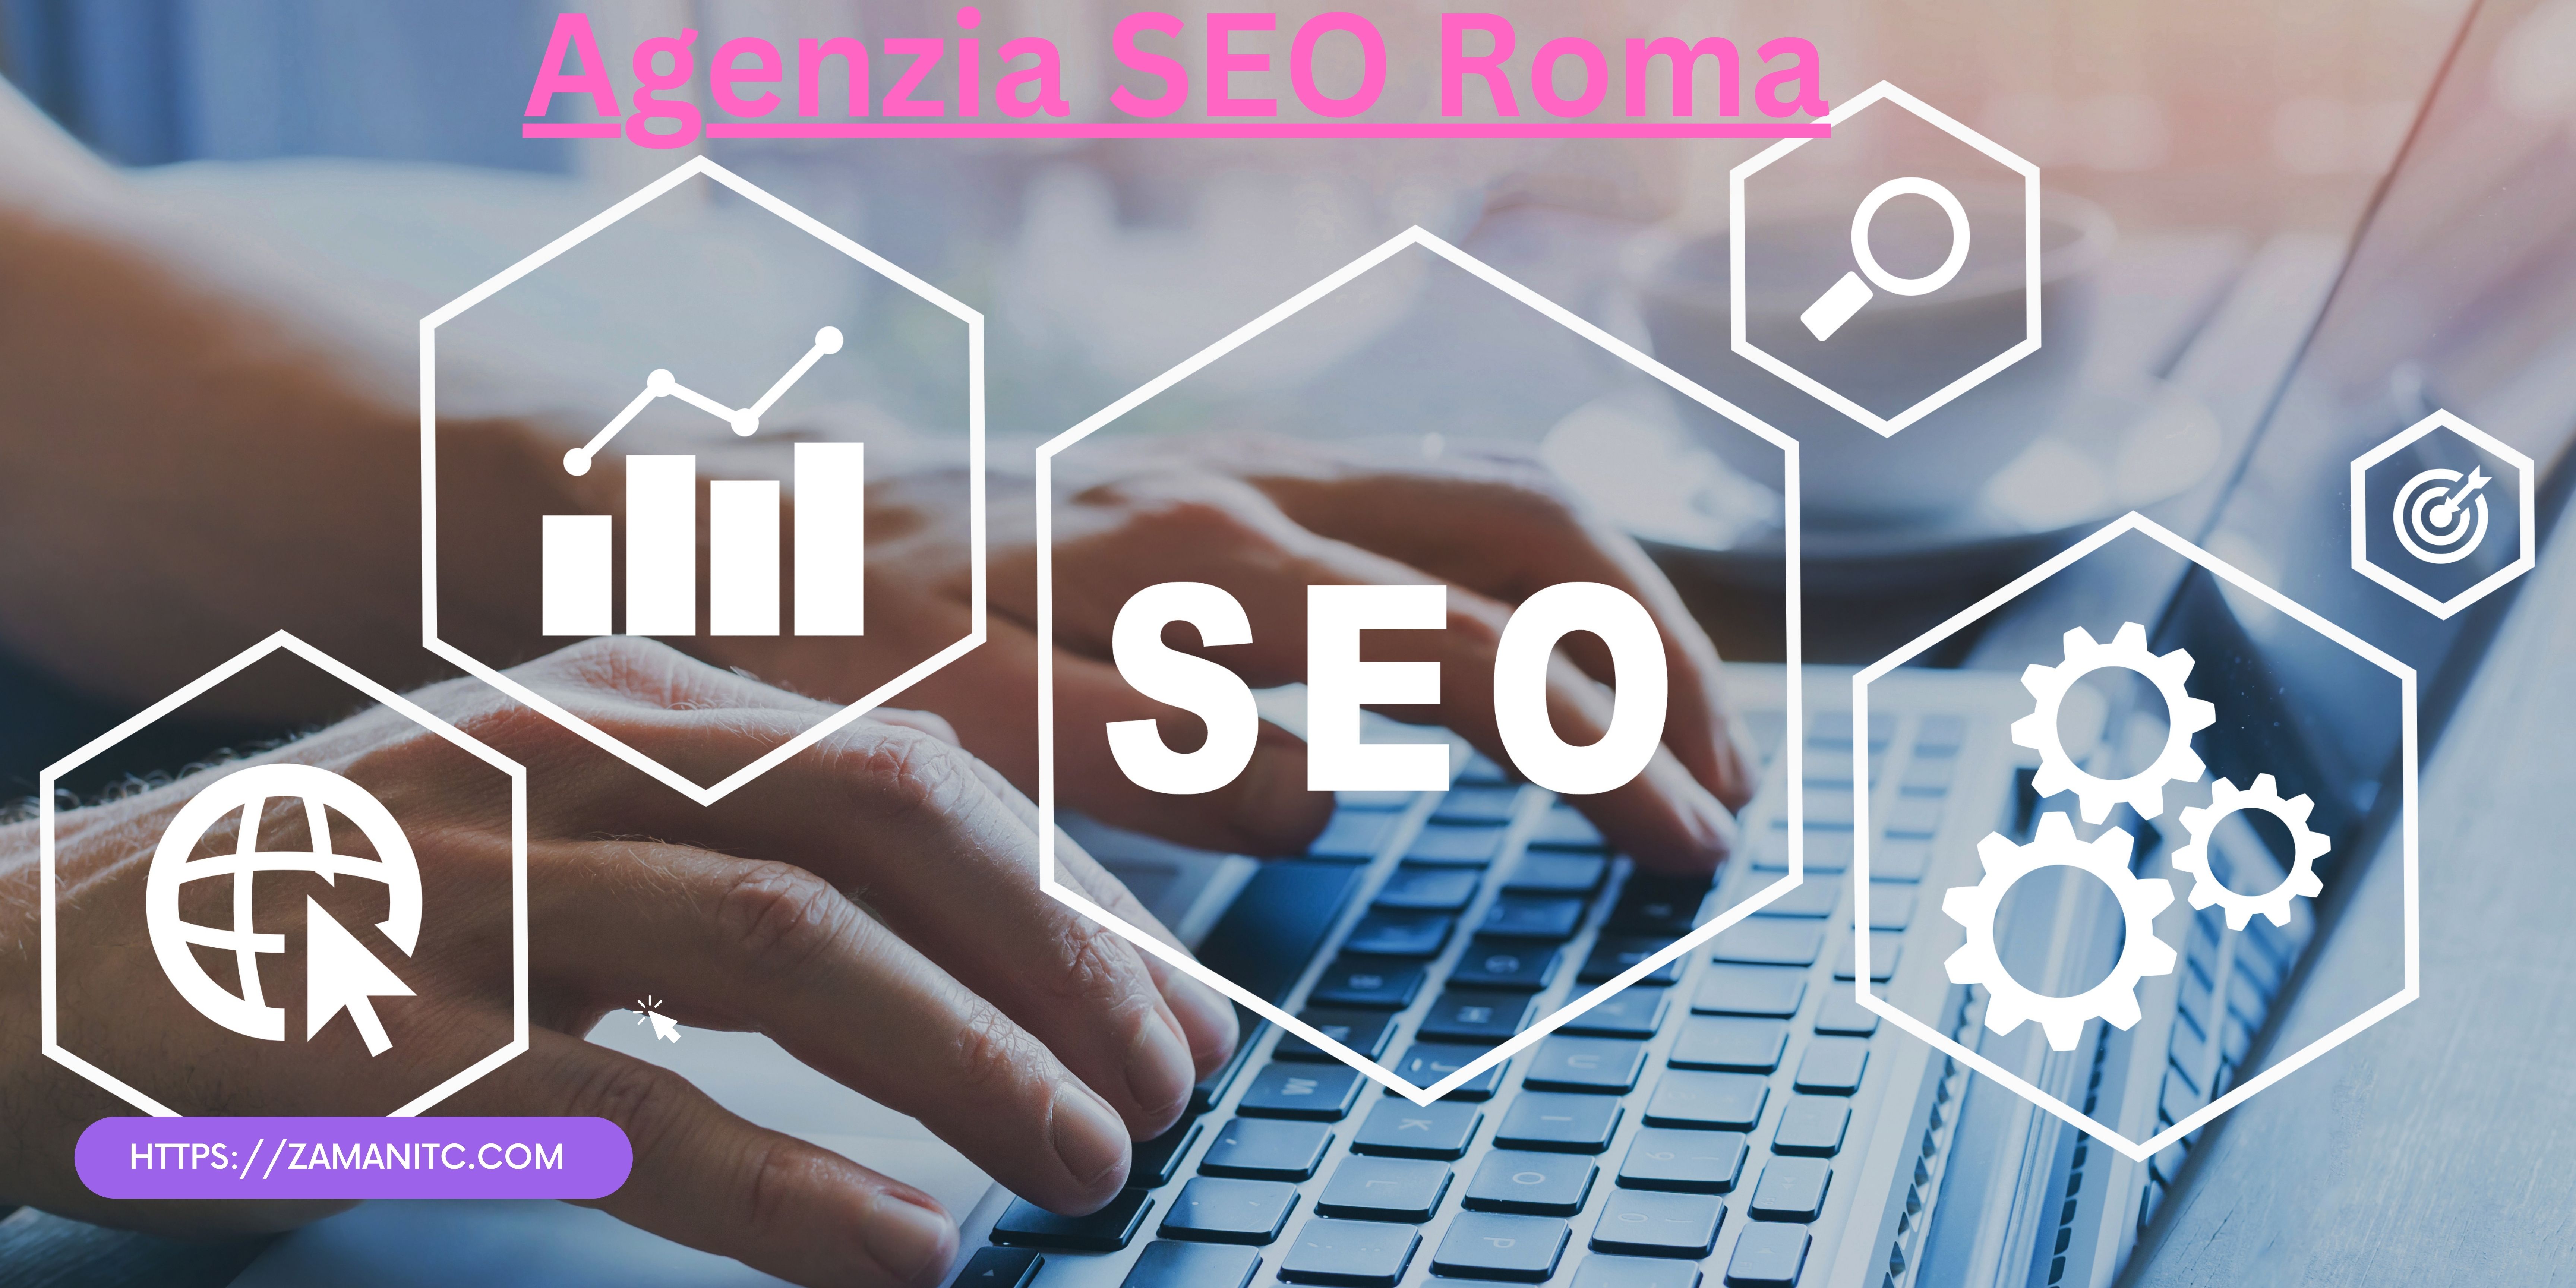 Hire Me | SEO Consultant | SEO Consulting Services | Digital Marketing